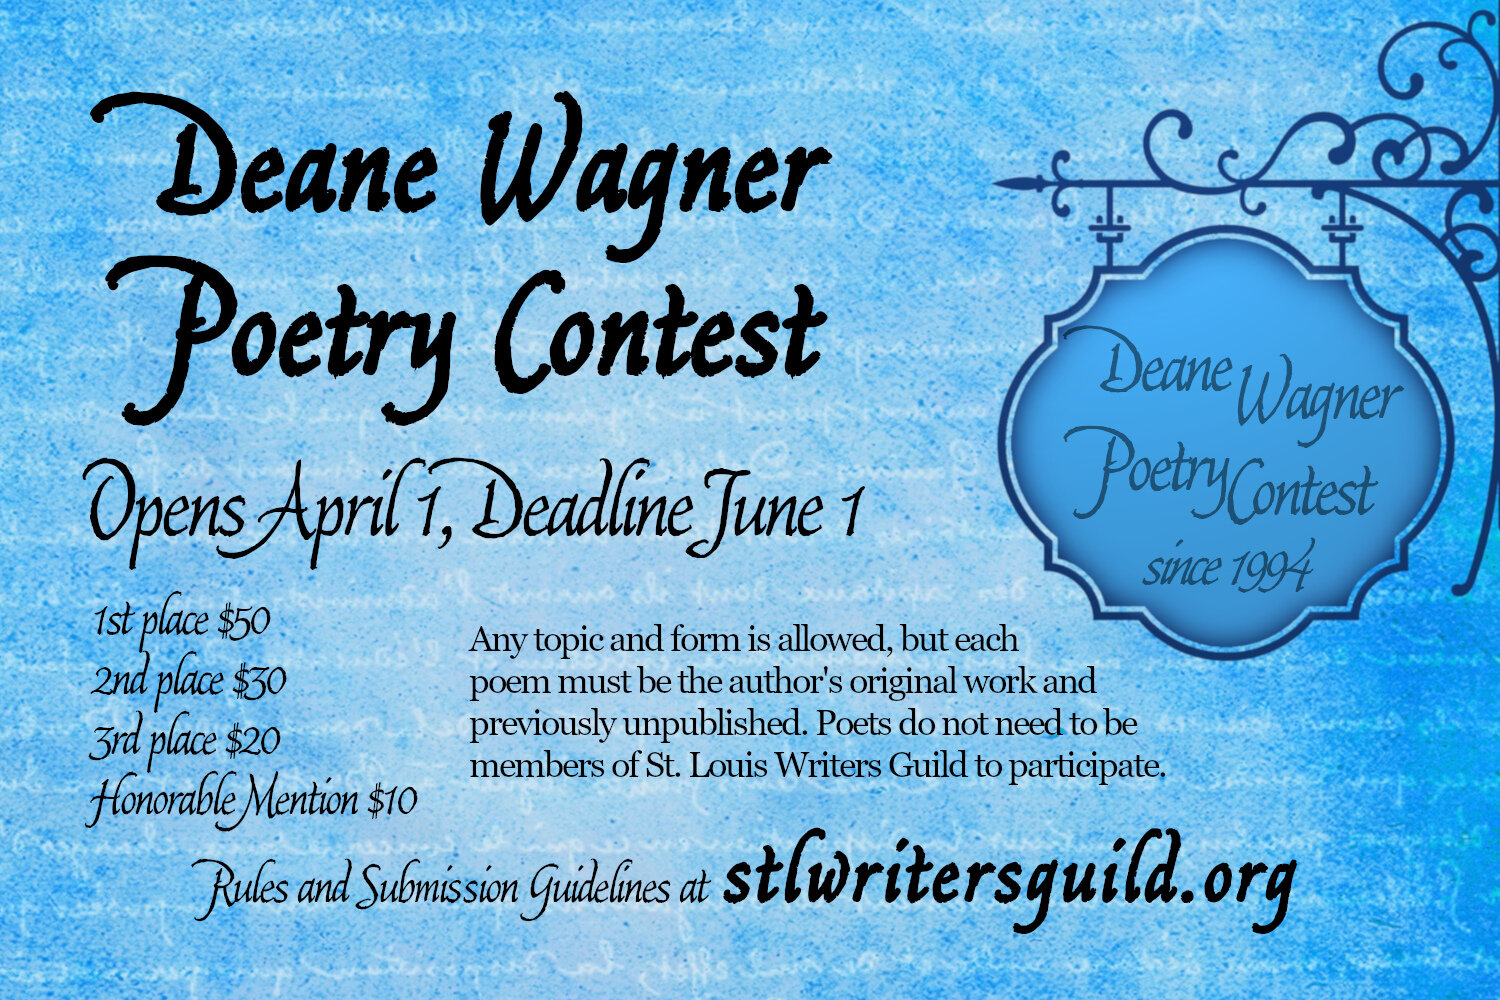 Deane Wagner Poetry Contest Ad.jpg